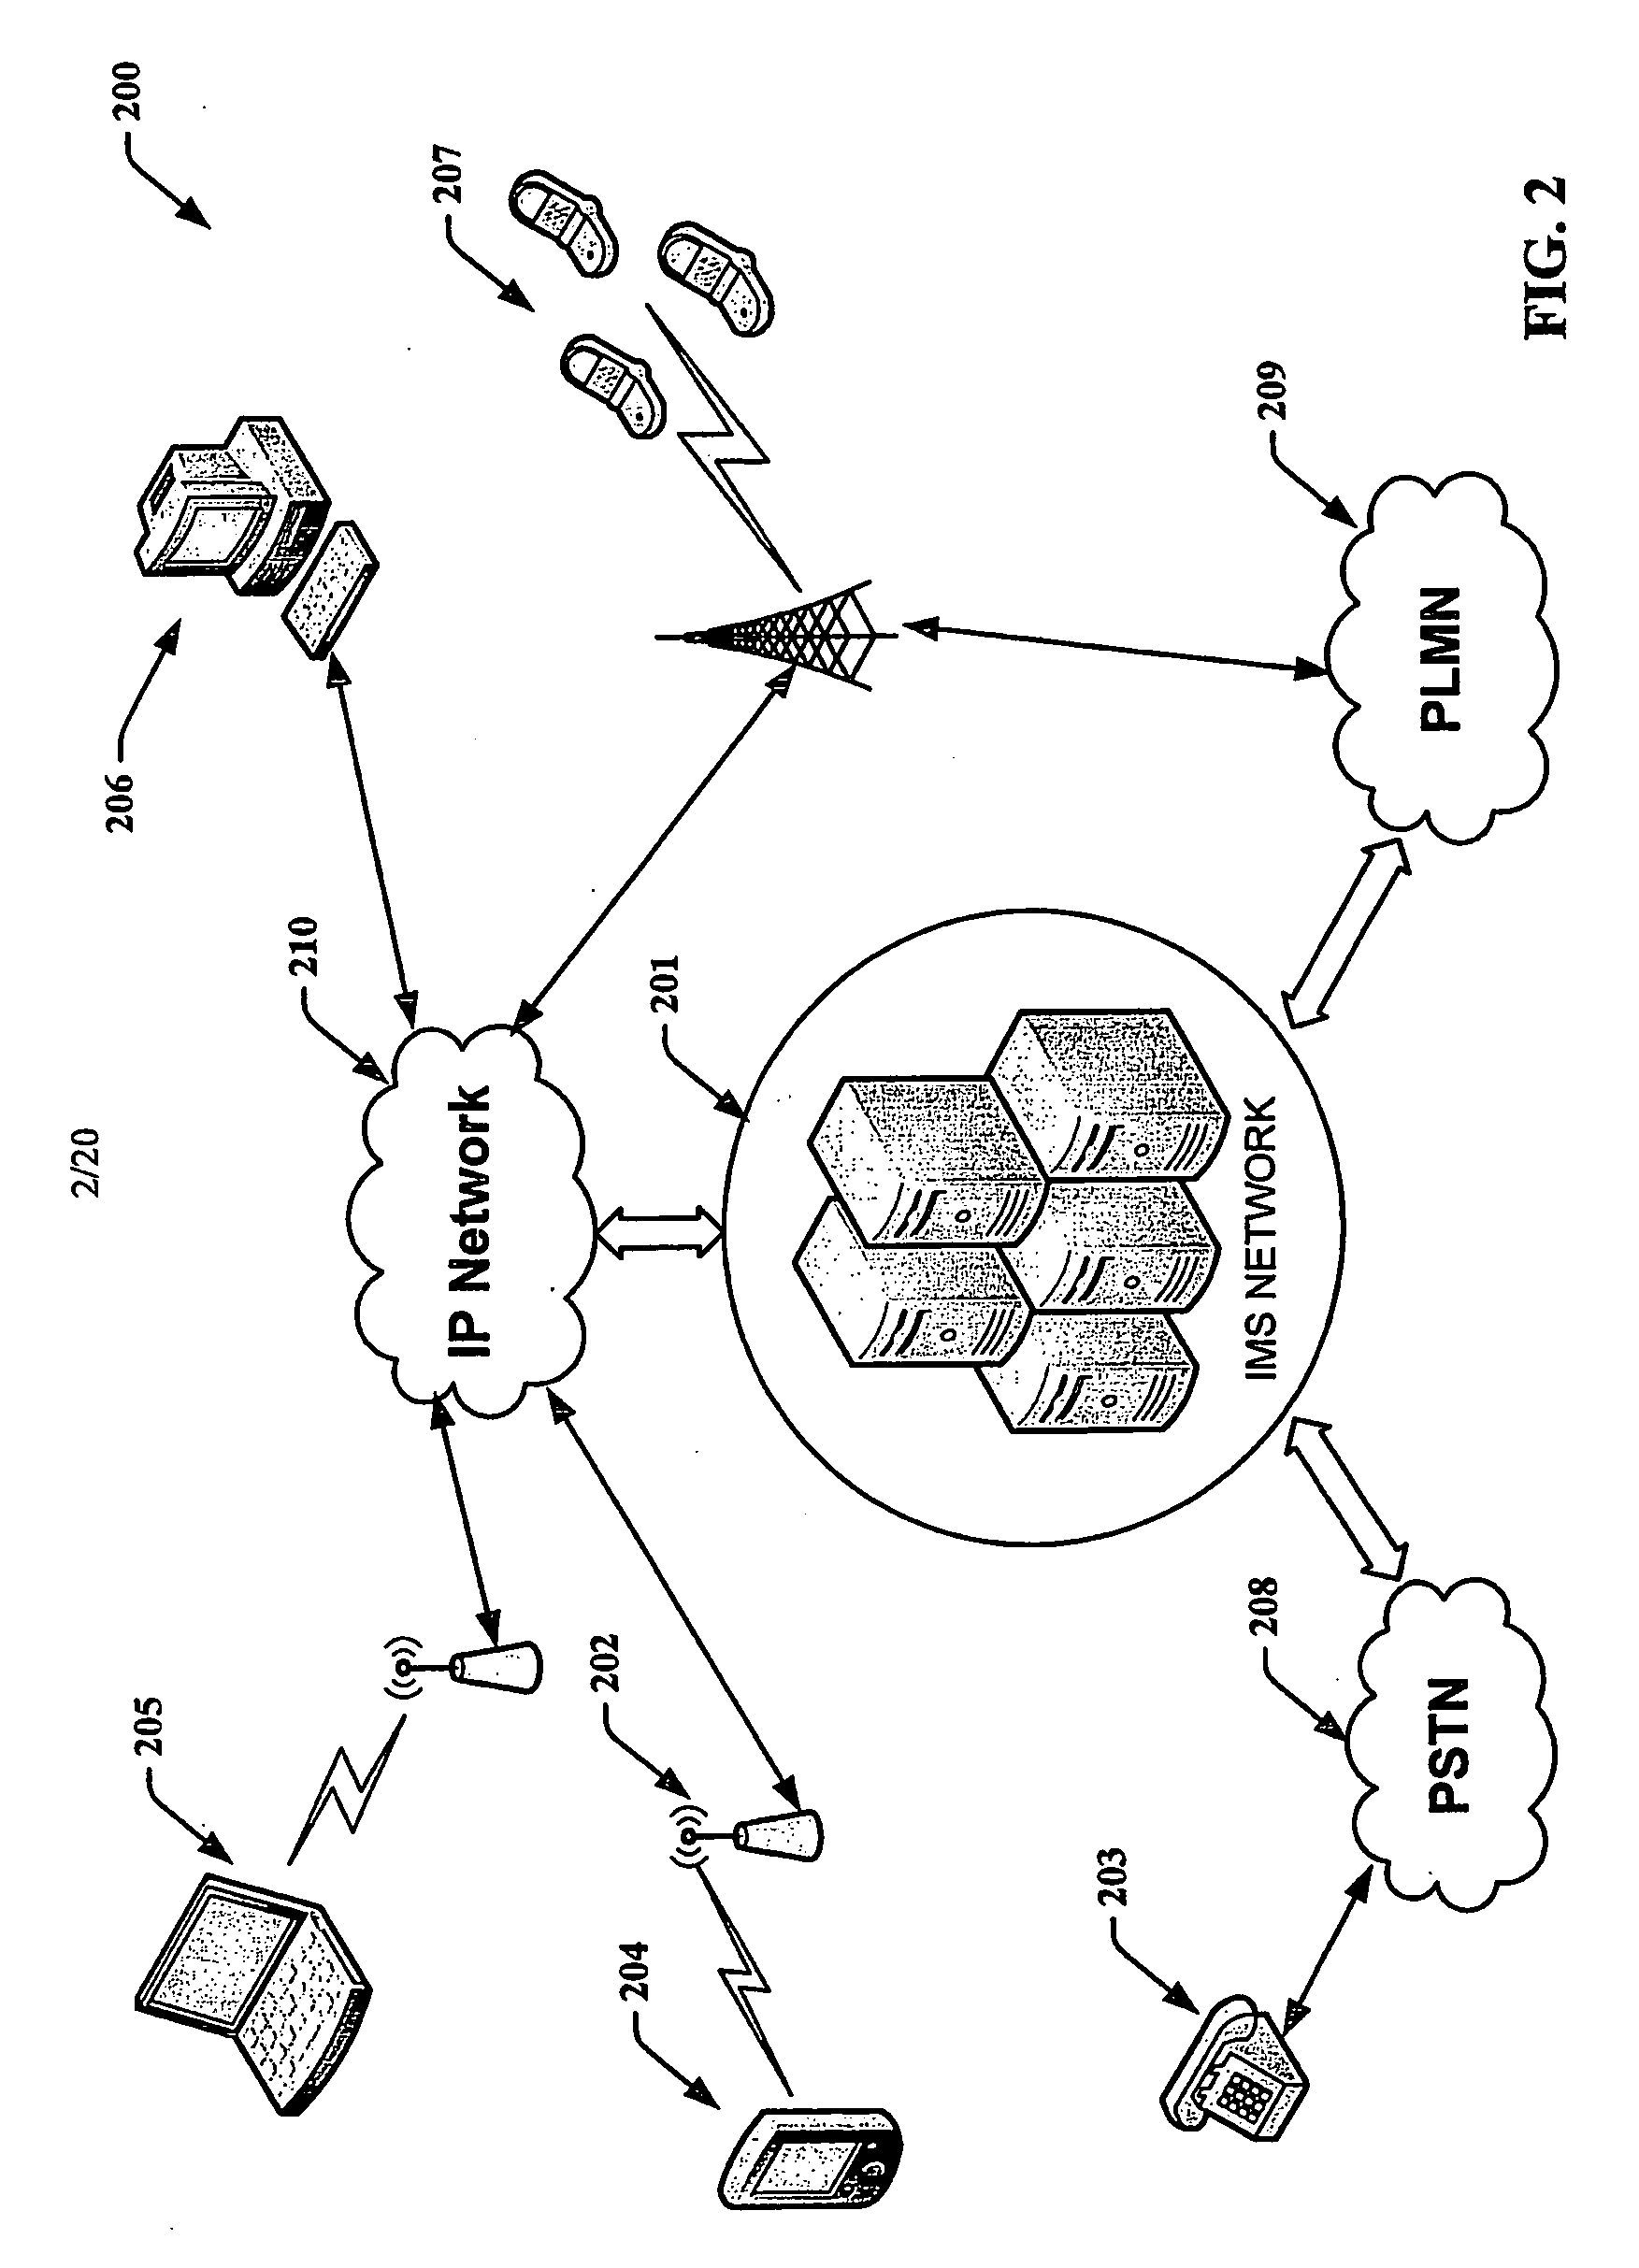 Usage data monitoring and communication between multiple devices